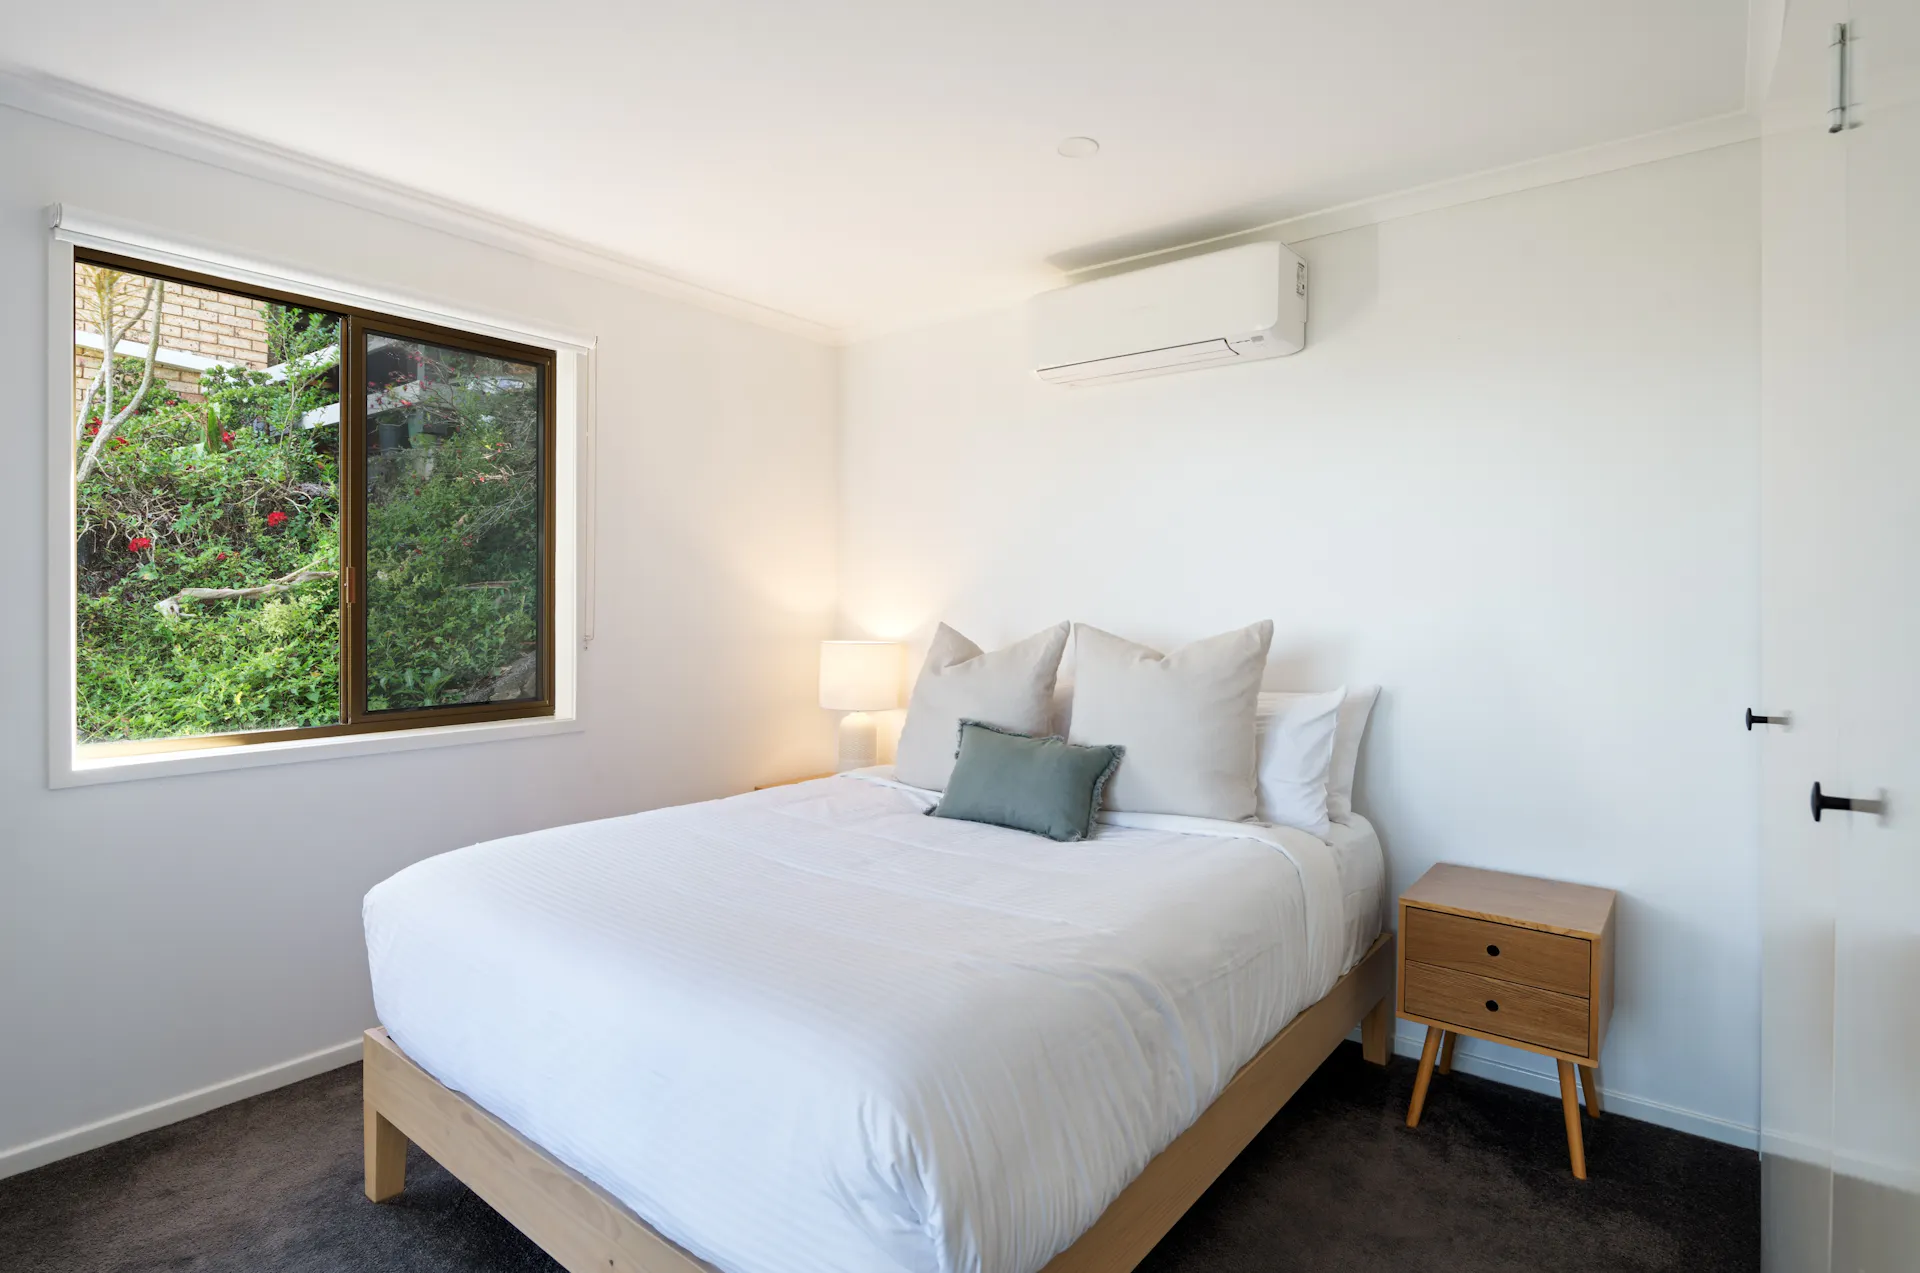 Wake up to picturesque views of lush trees right outside your bedroom windows